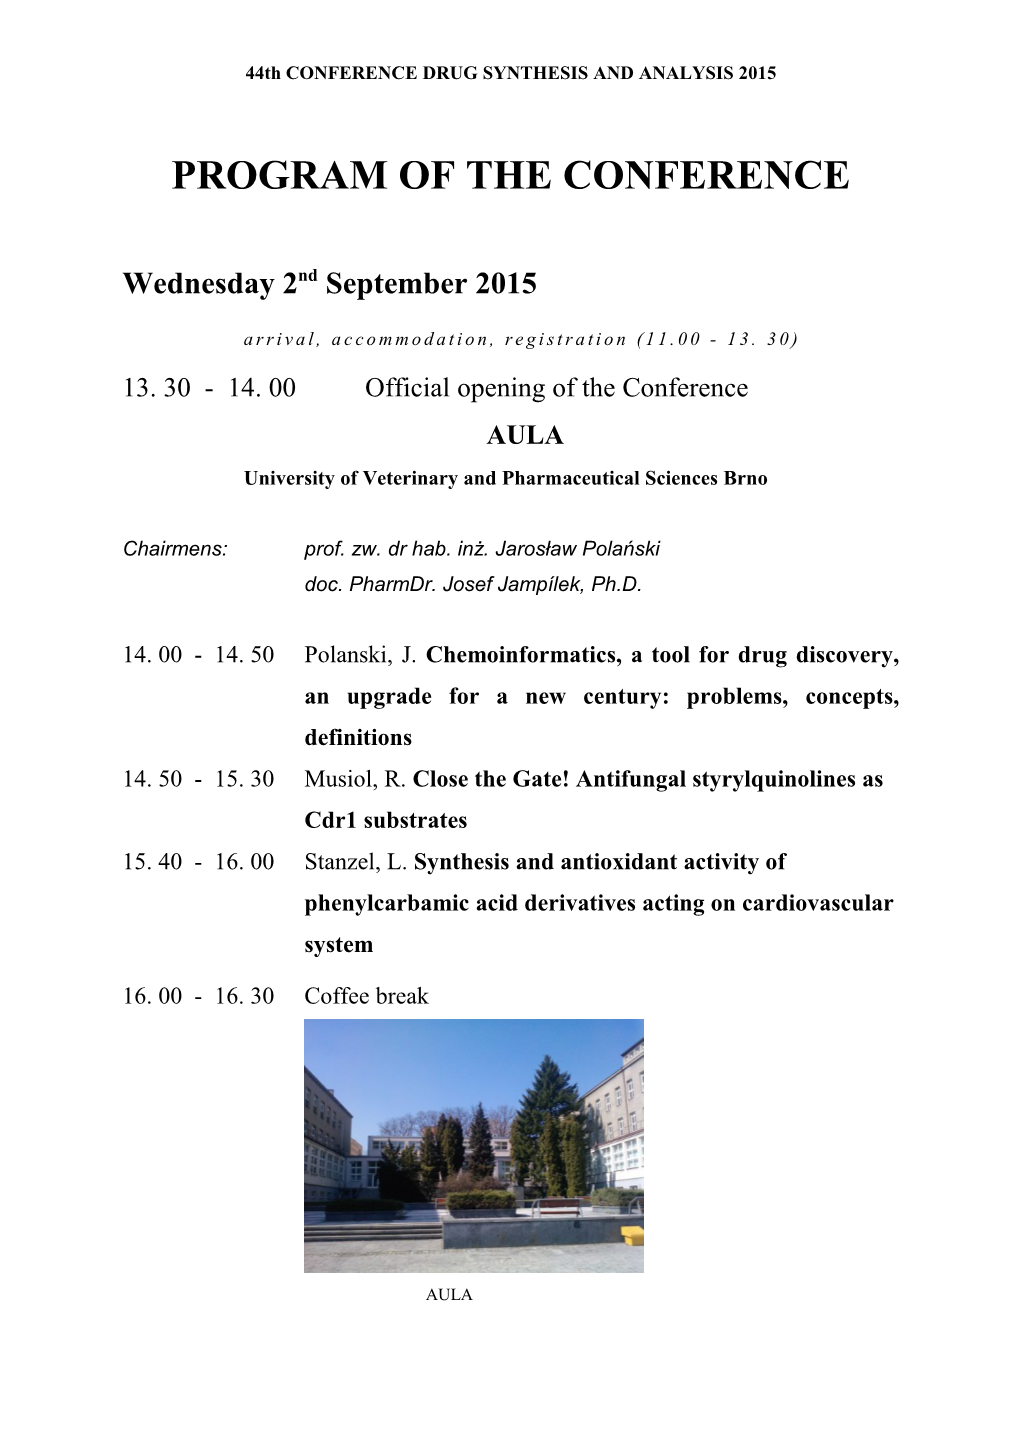 Provisional Program of the Conference